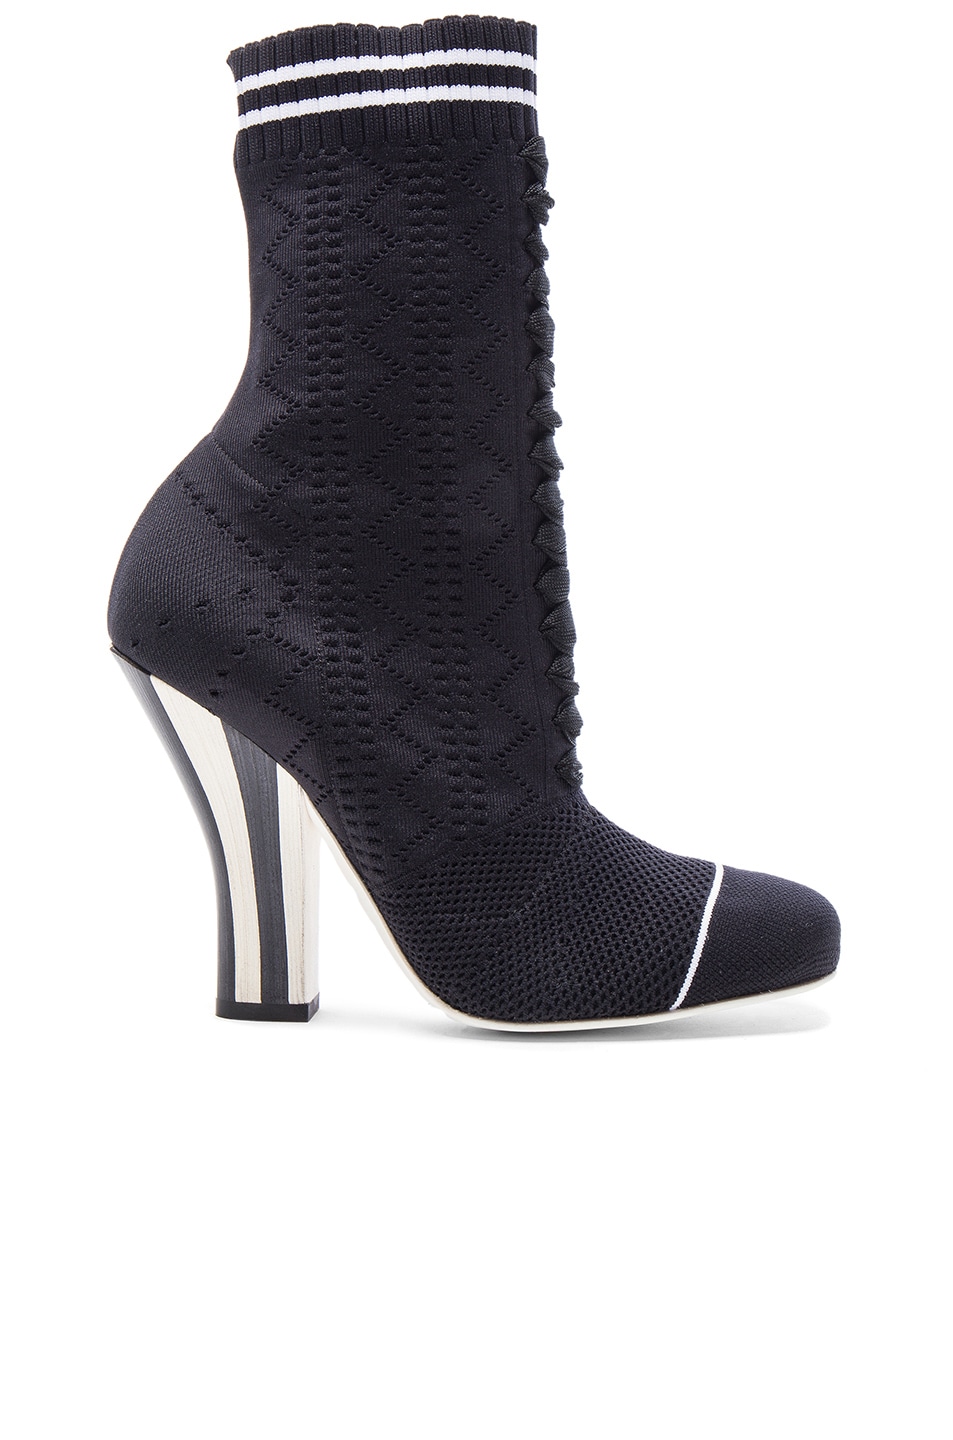 Image 1 of Fendi Knit Booties in Black & White